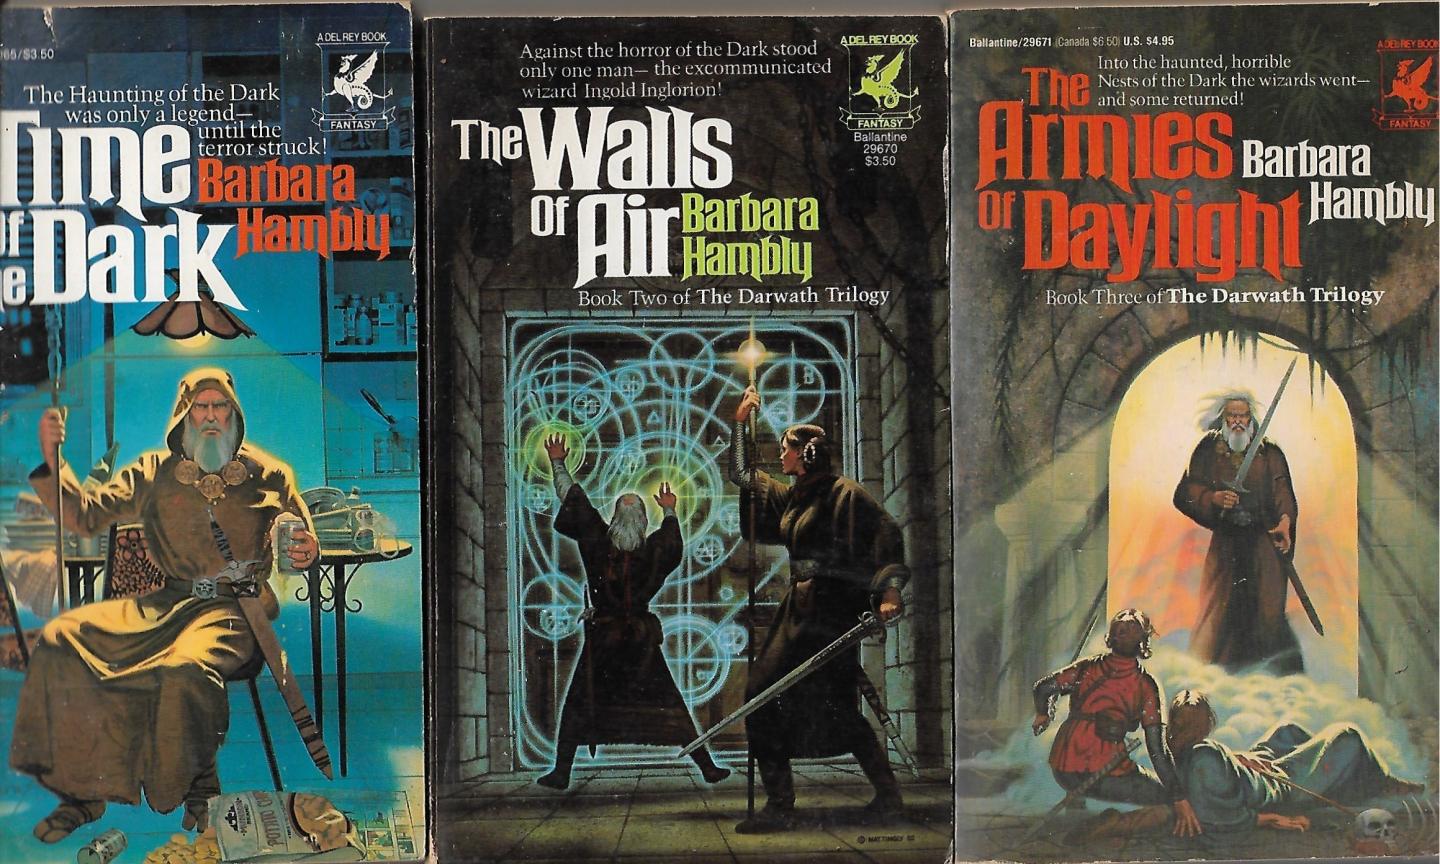 Hambly, Barbara - Darwath trilogy  1 Time of the dark  2 The walls of air 3 The armies of daylight